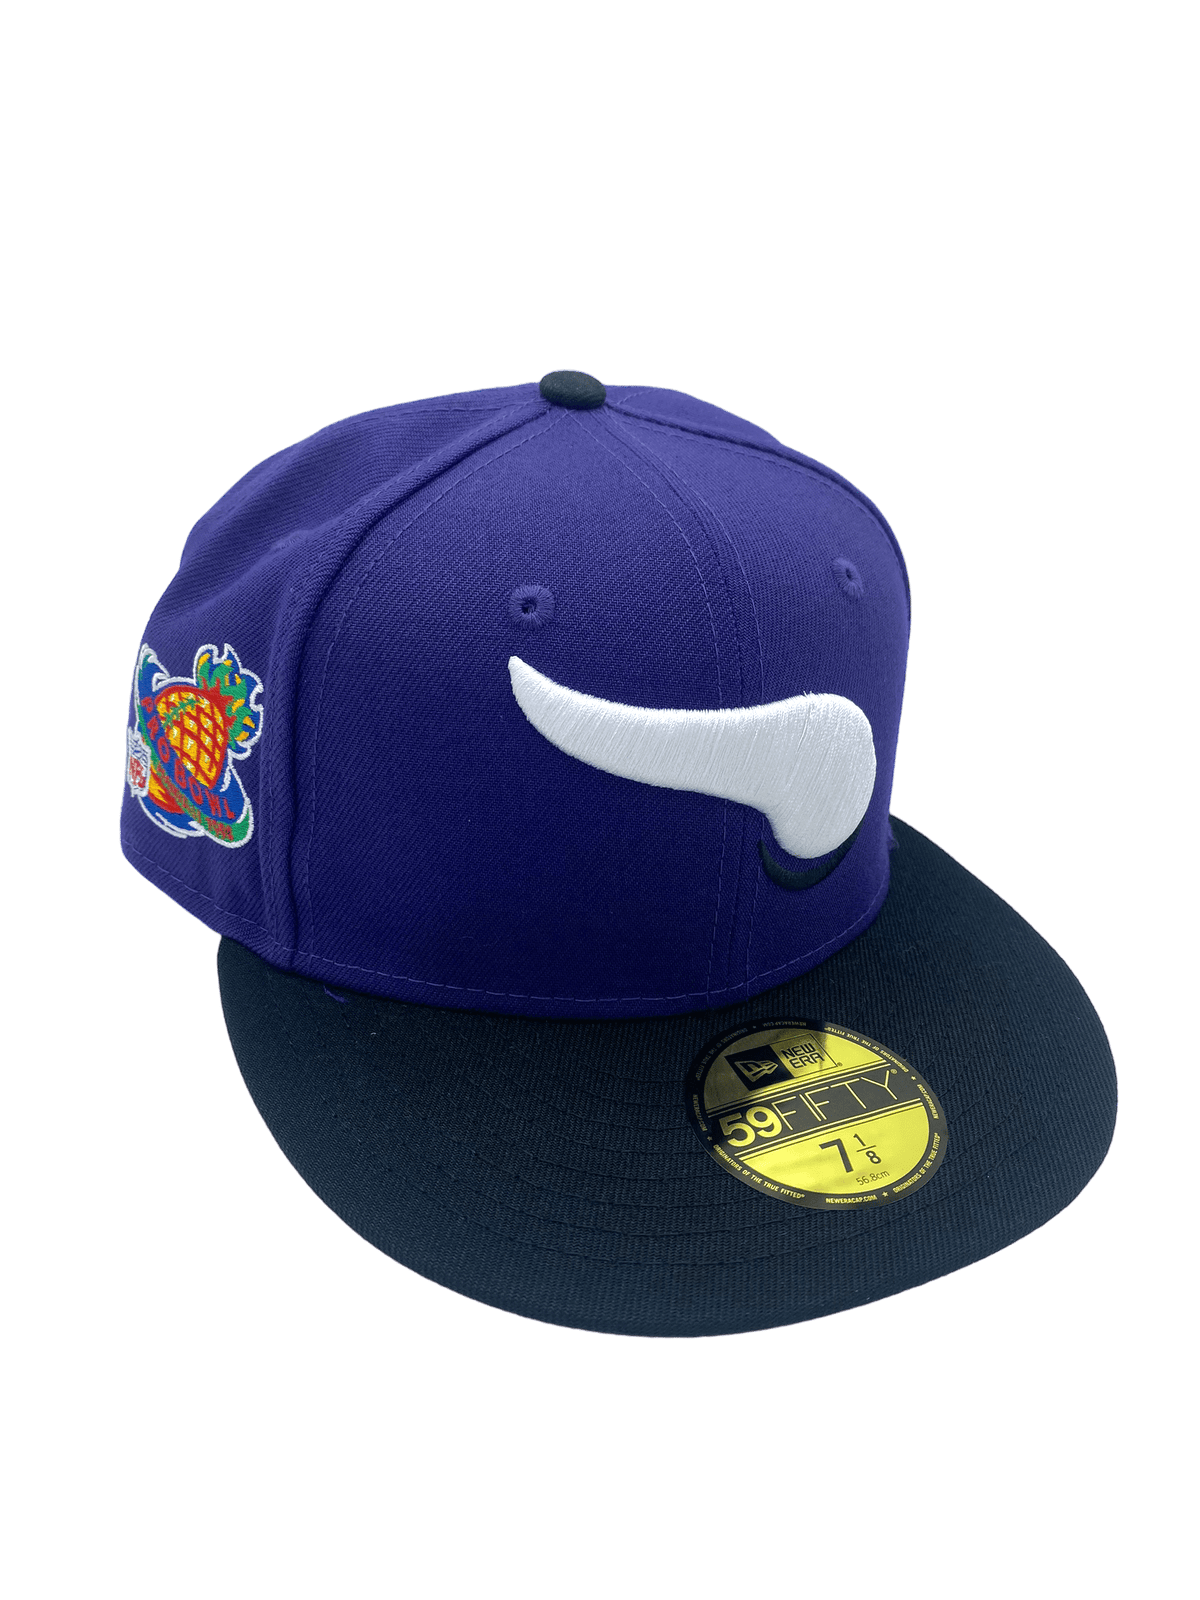 San Diego Padres Draft Day Navy White 59Fifty Fitted Hat by MLB x